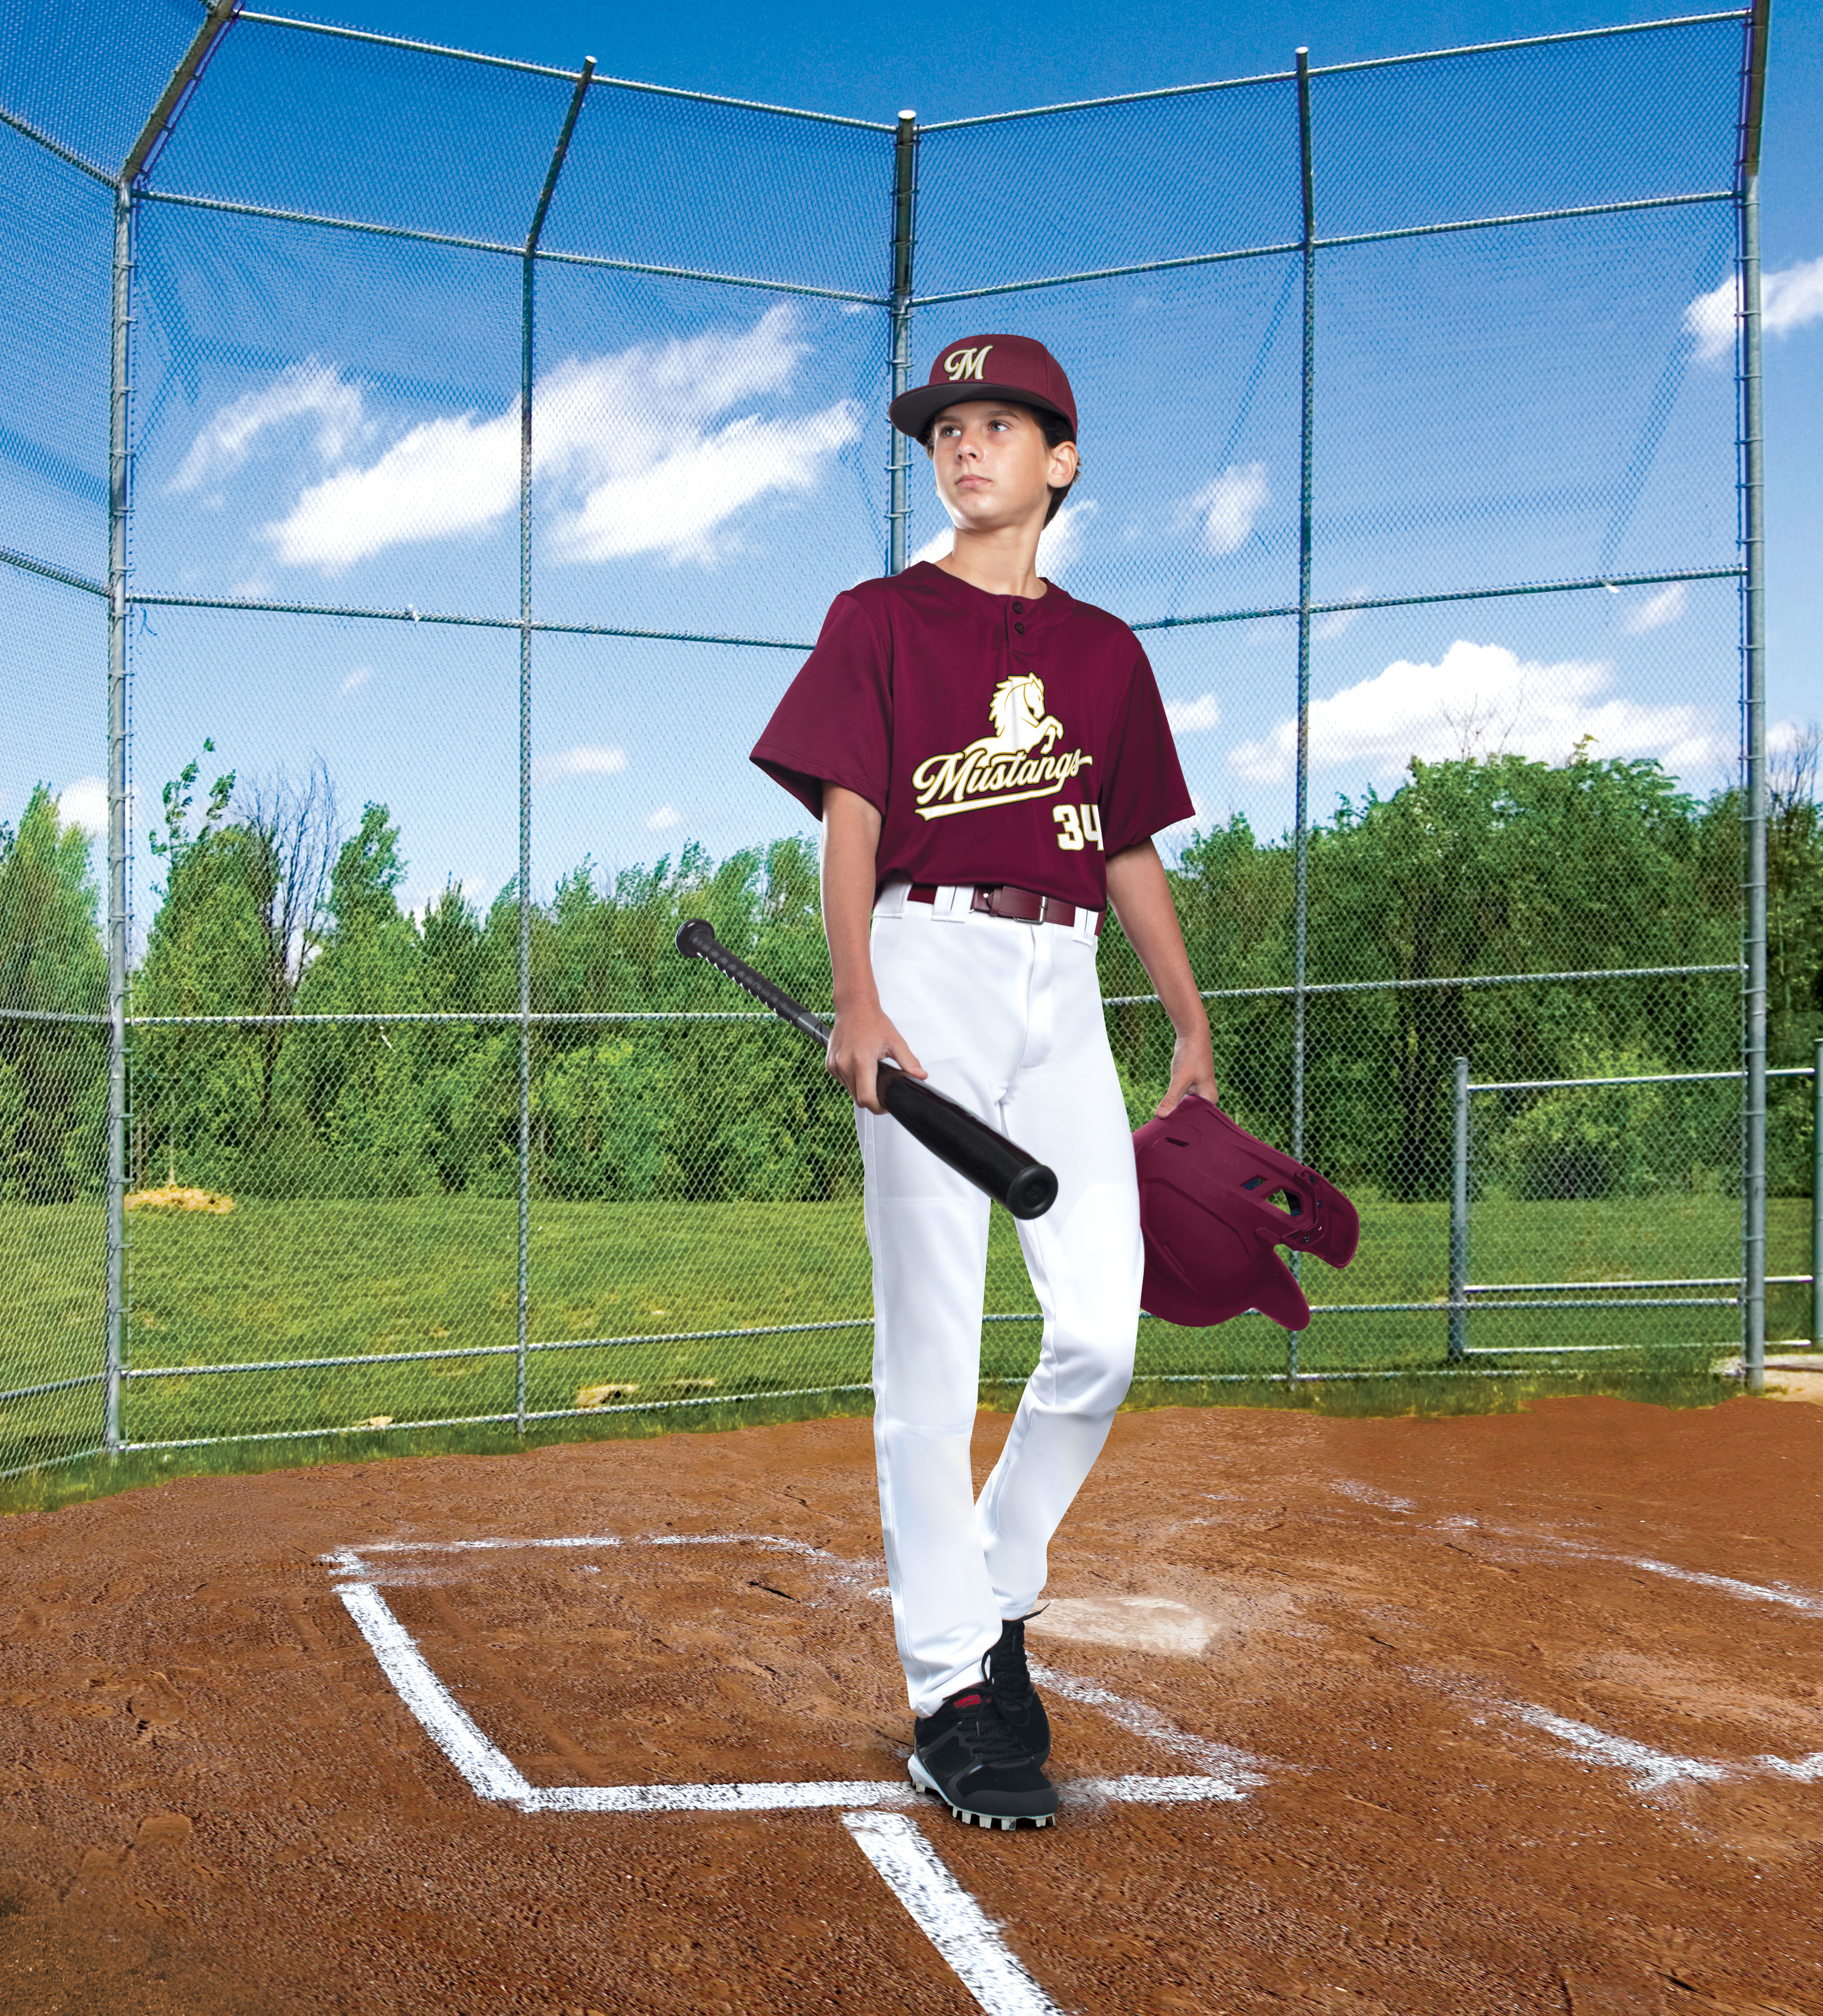 Baseball Pants Pull-Up Elastic Drawstring Waist Ankle Pocket Youth Boys Russell 